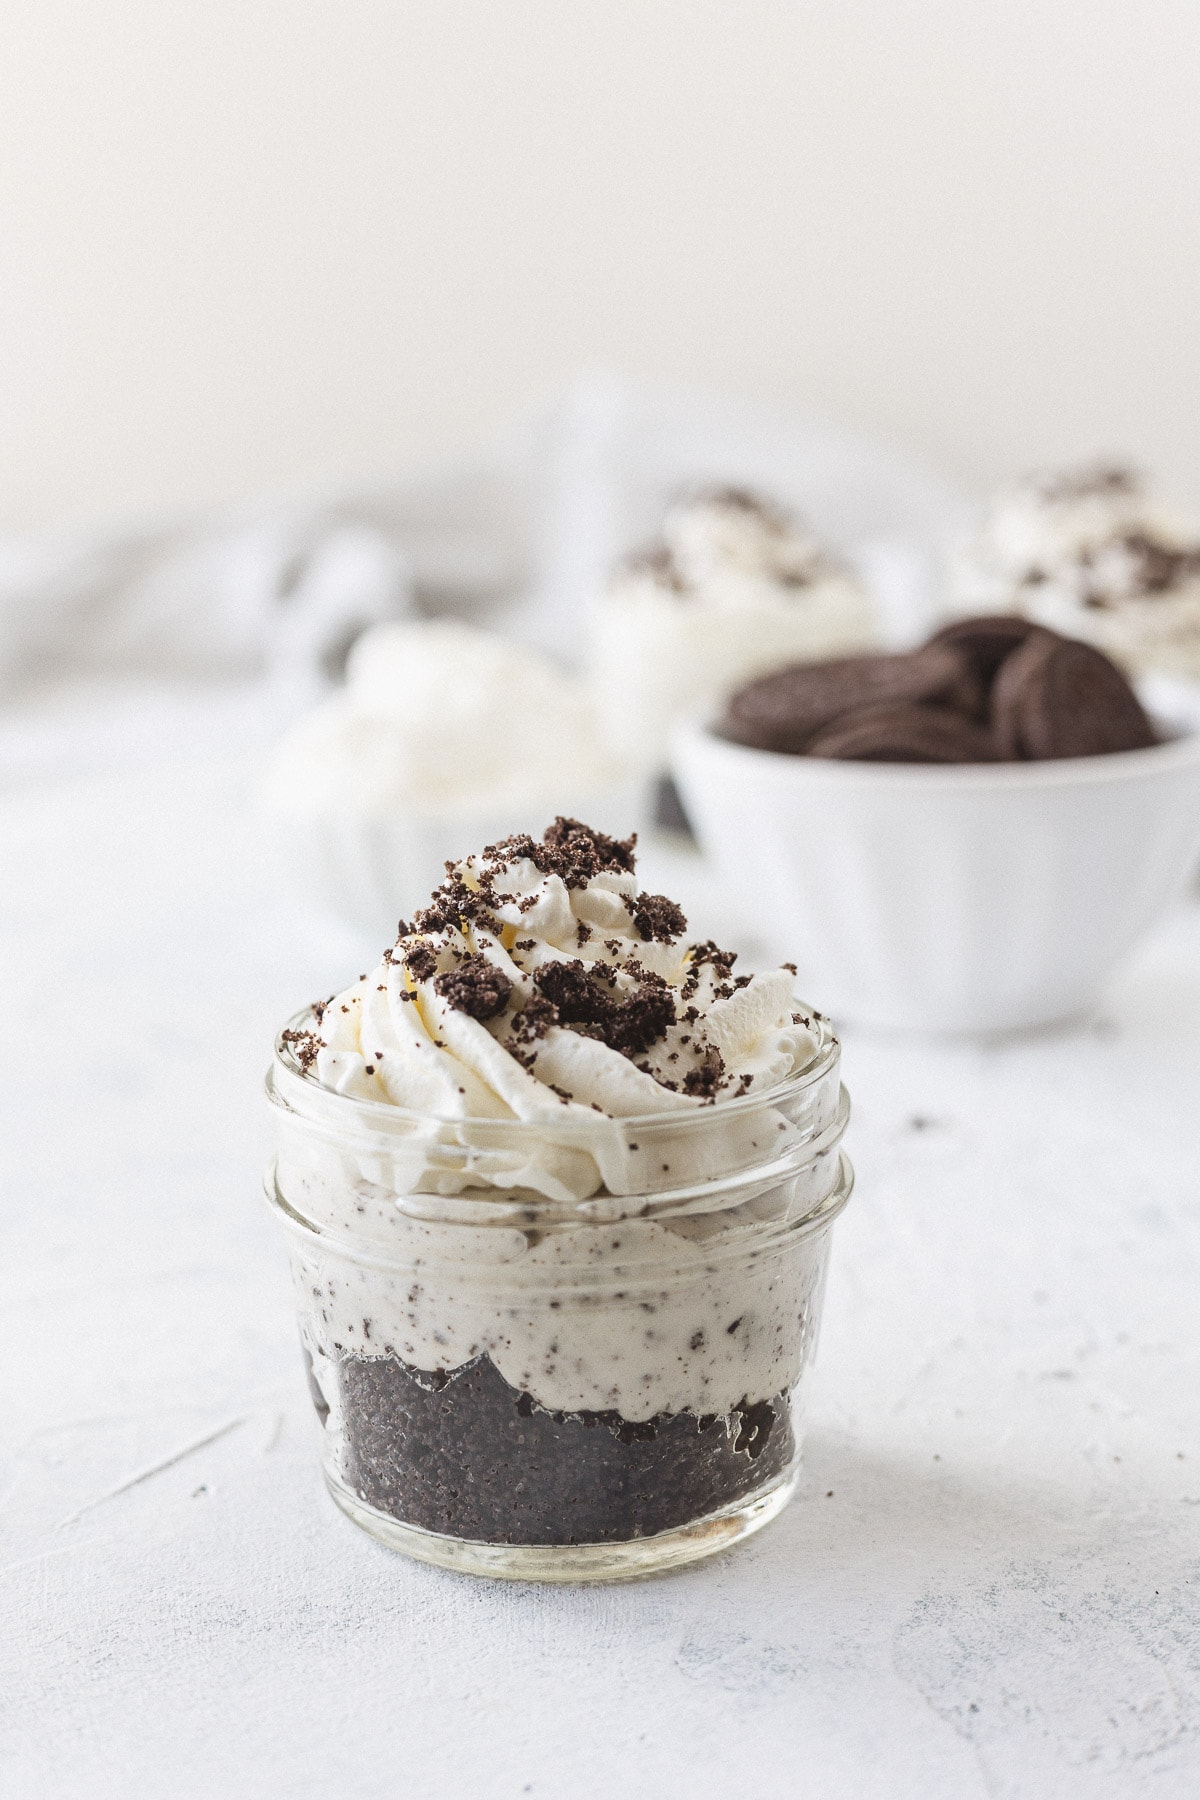 A no bake Oreo cheesecake in a jar topped with whipped cream and crushed Oreos.